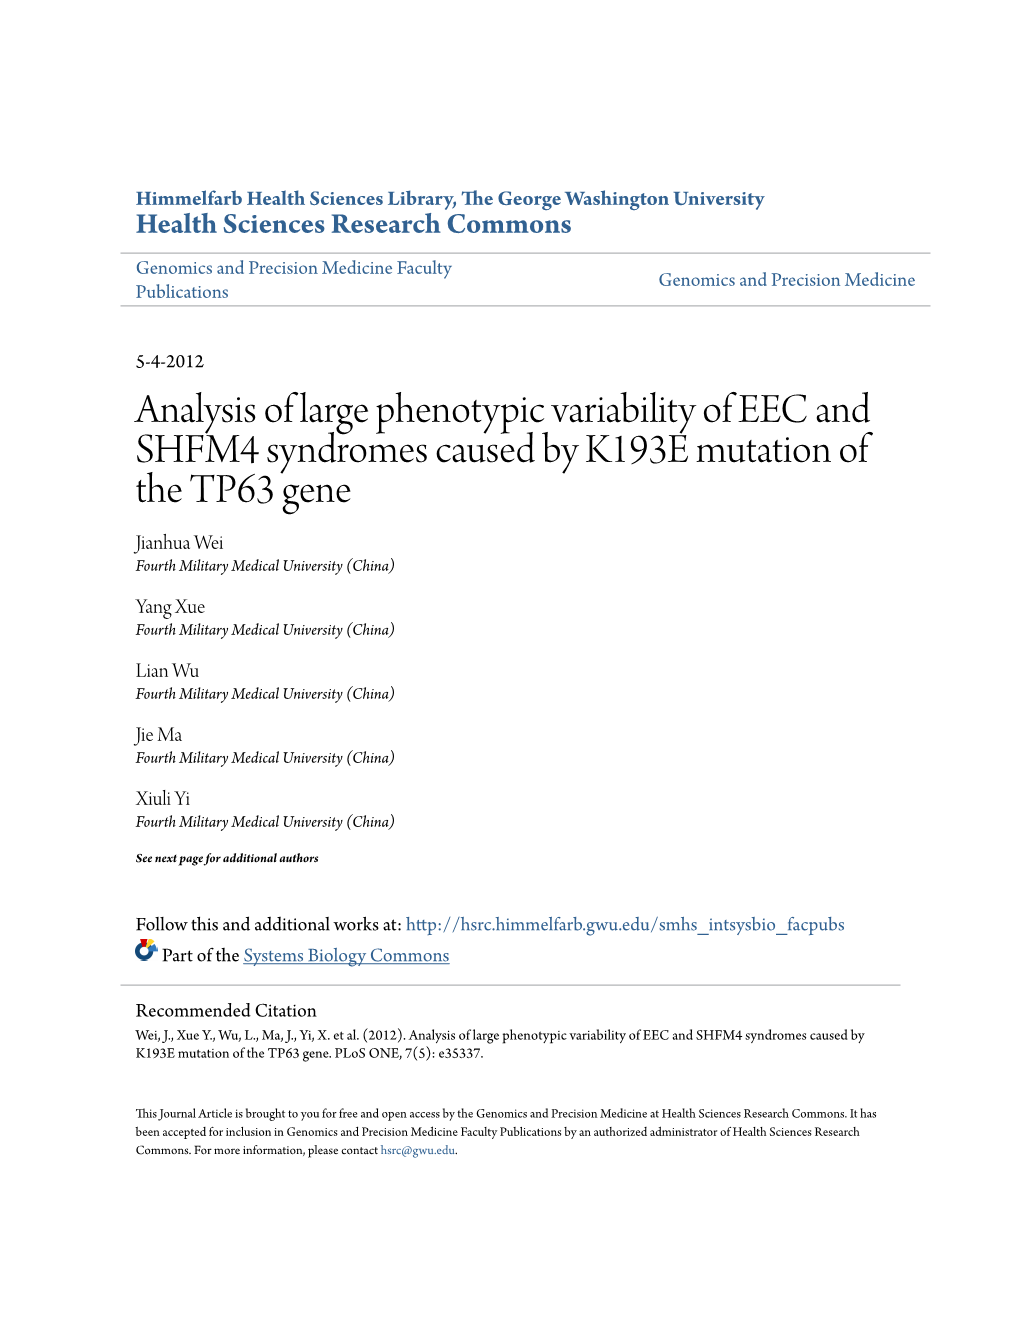 Analysis of Large Phenotypic Variability of EEC and SHFM4 Syndromes Caused by K193E Mutation of the TP63 Gene Jianhua Wei Fourth Military Medical University (China)